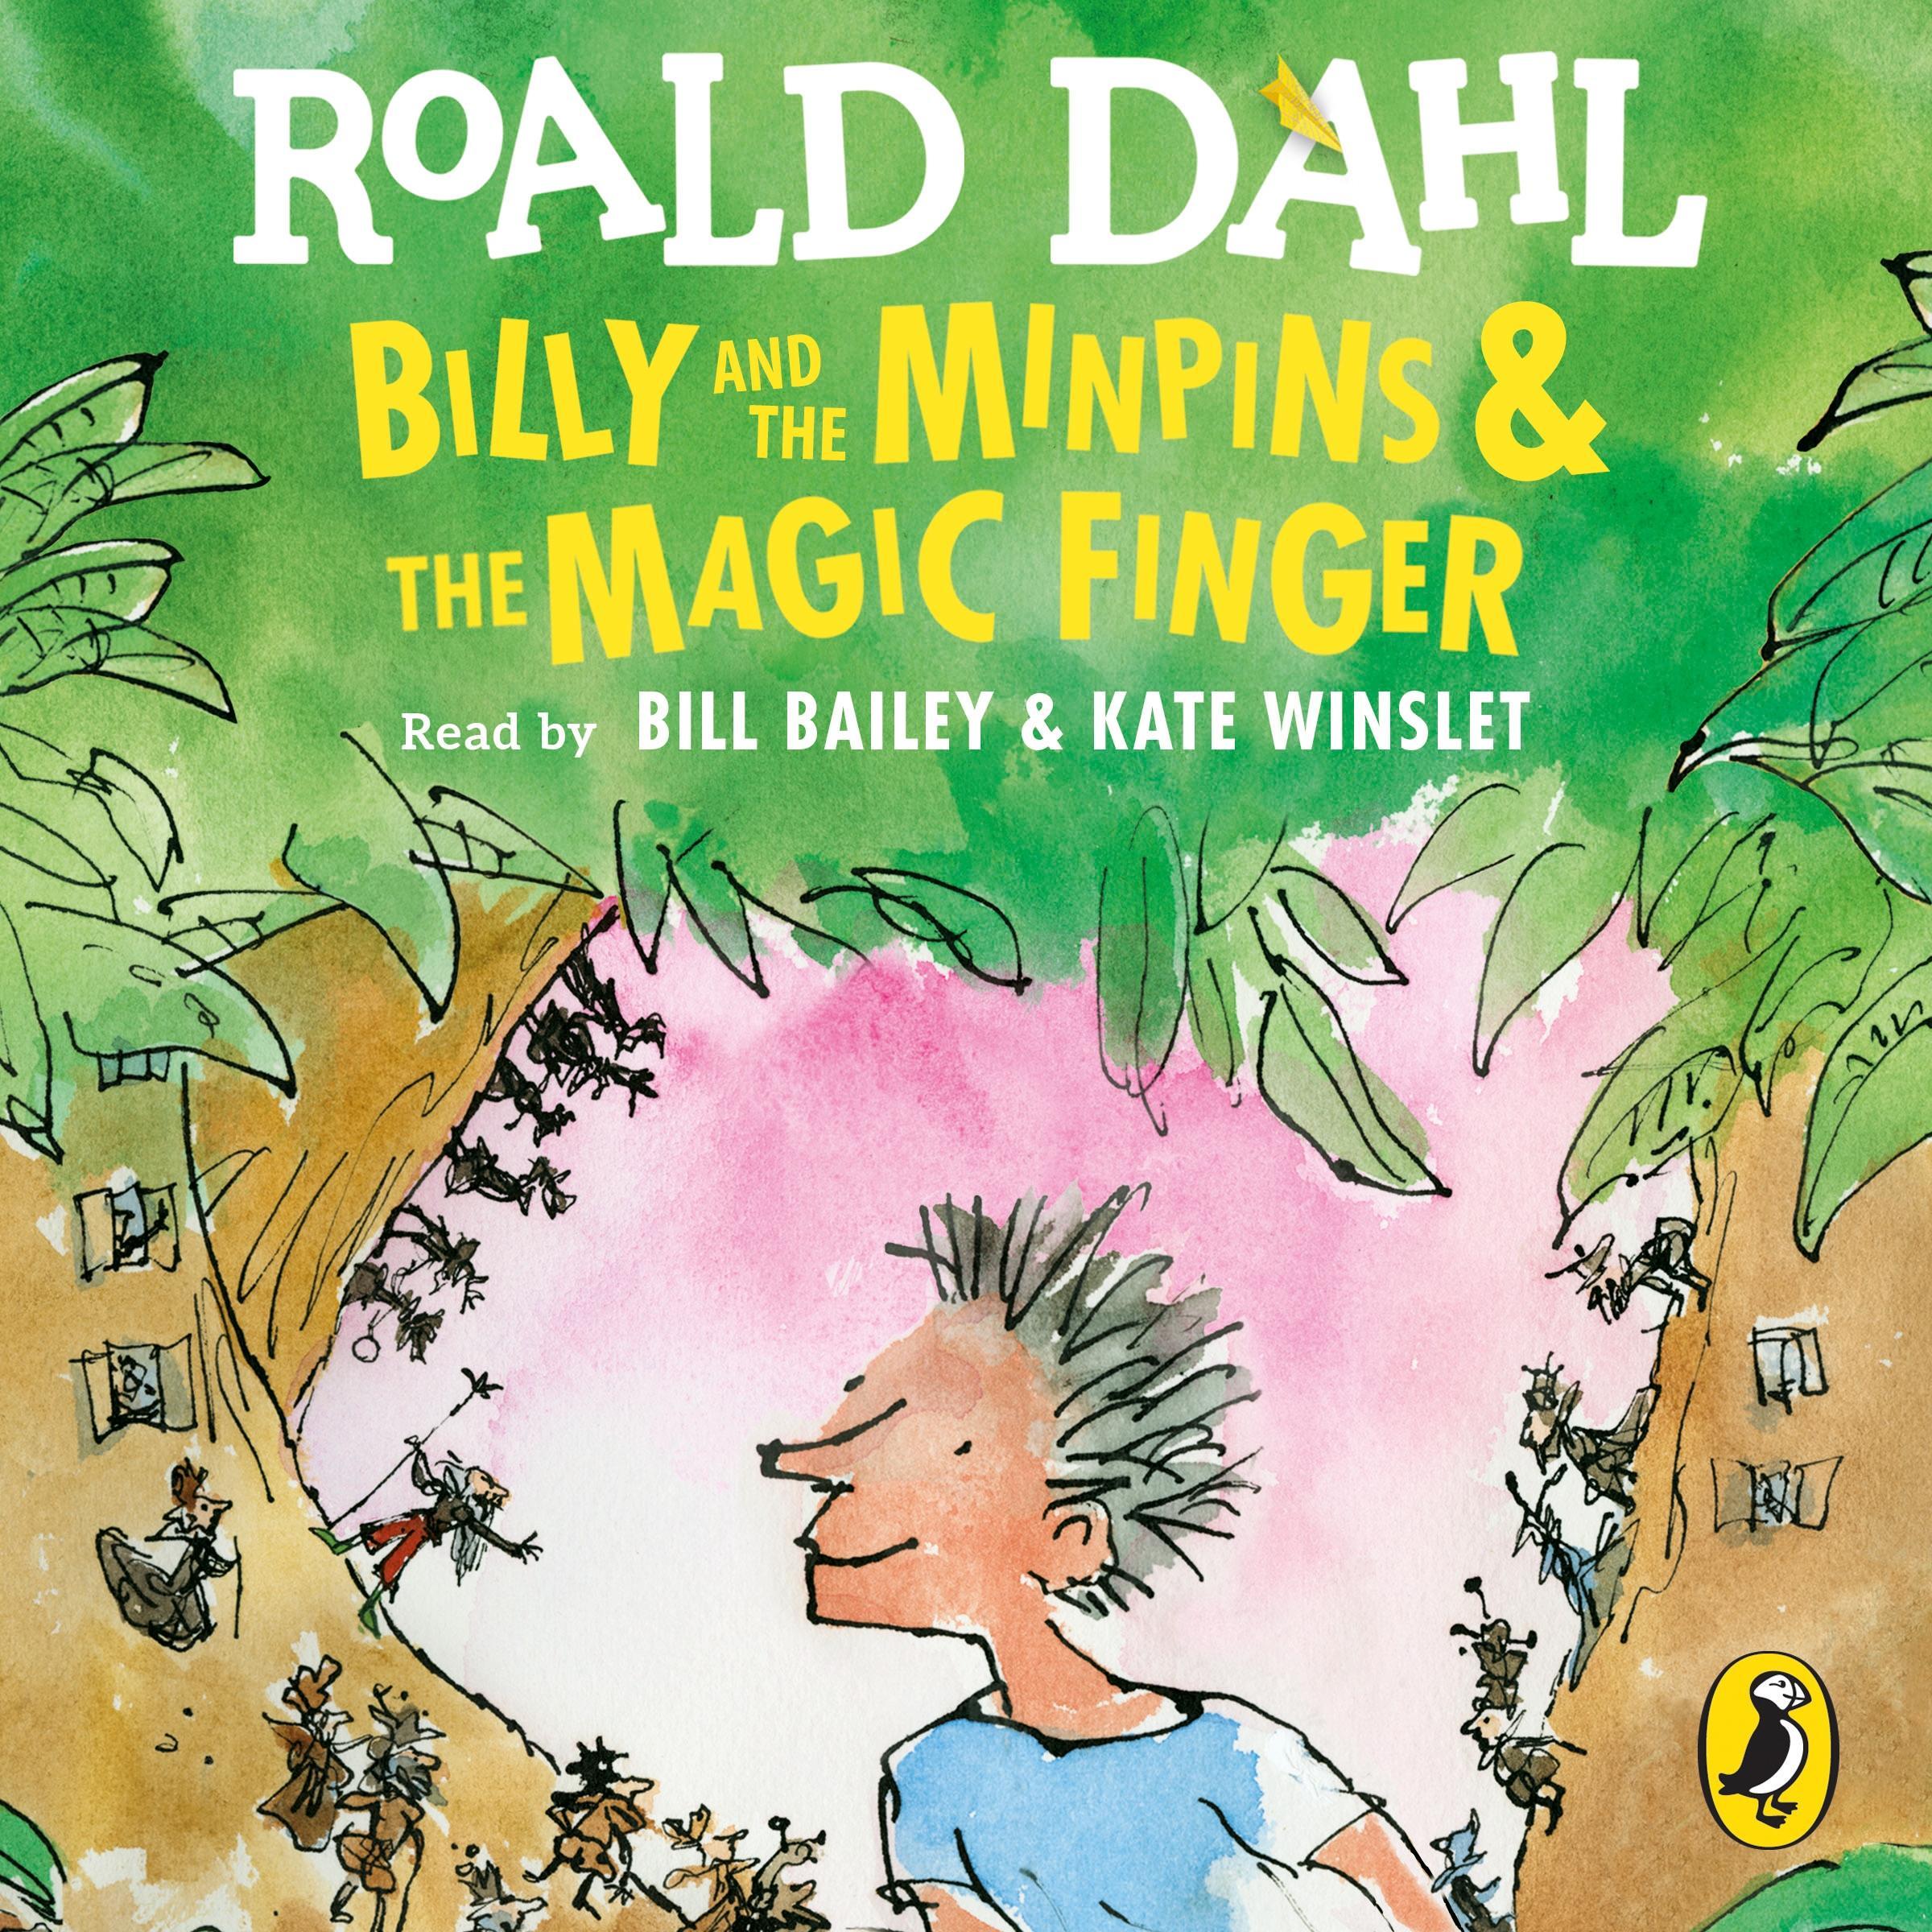 Billy and the Minpins & The Magic Finger - Roald Dahl